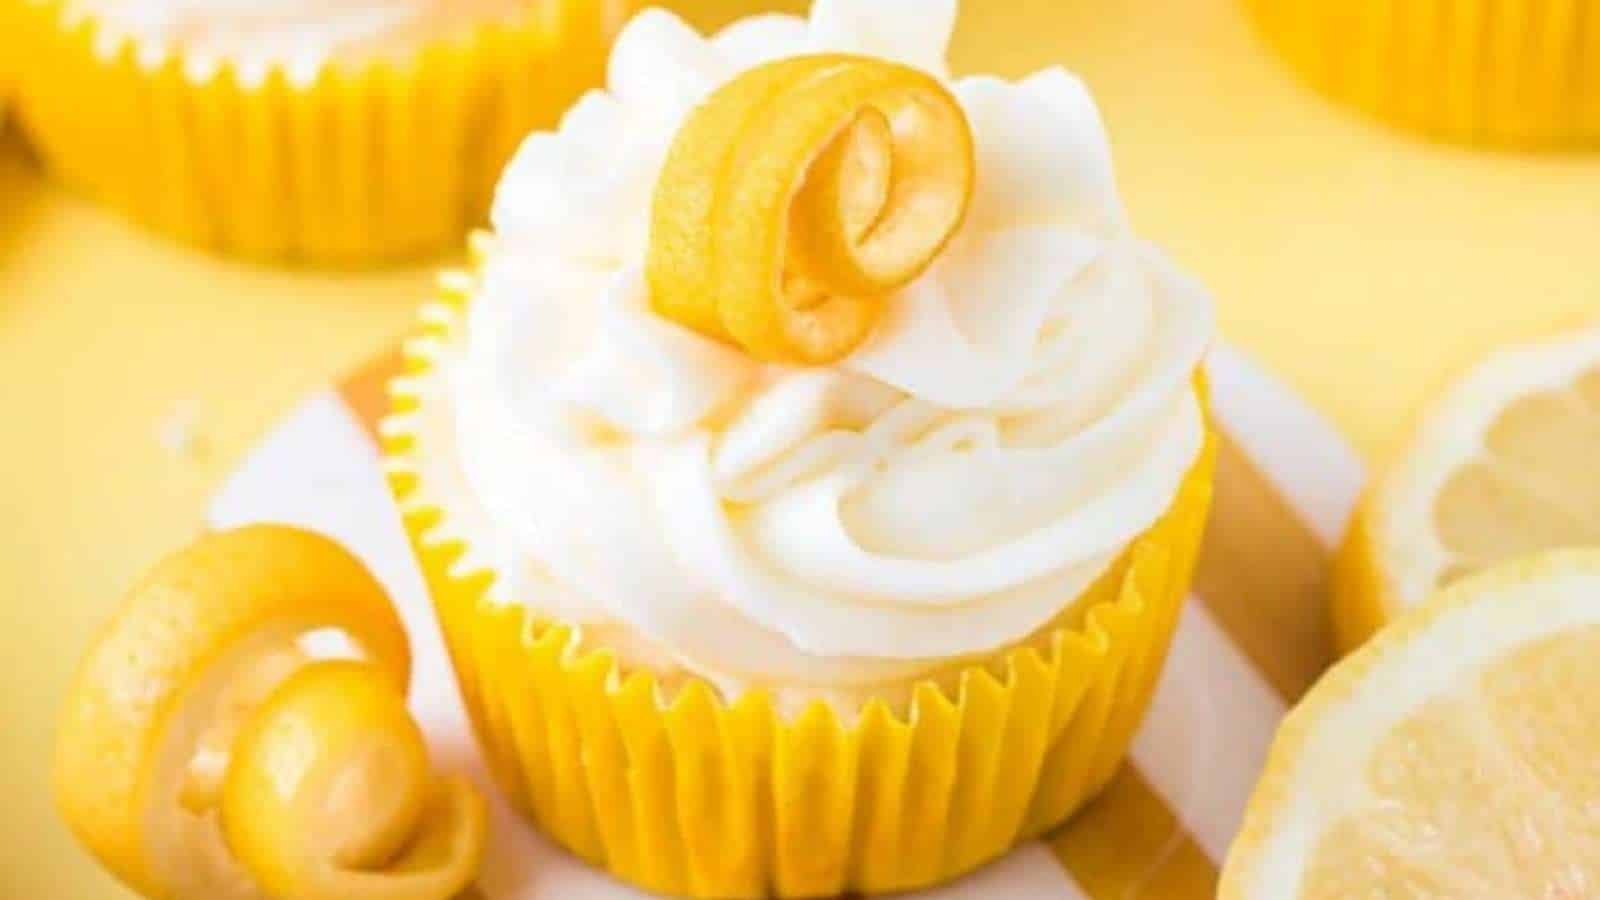 Lemon cupcakes topped with whipped cream and lemon slices.